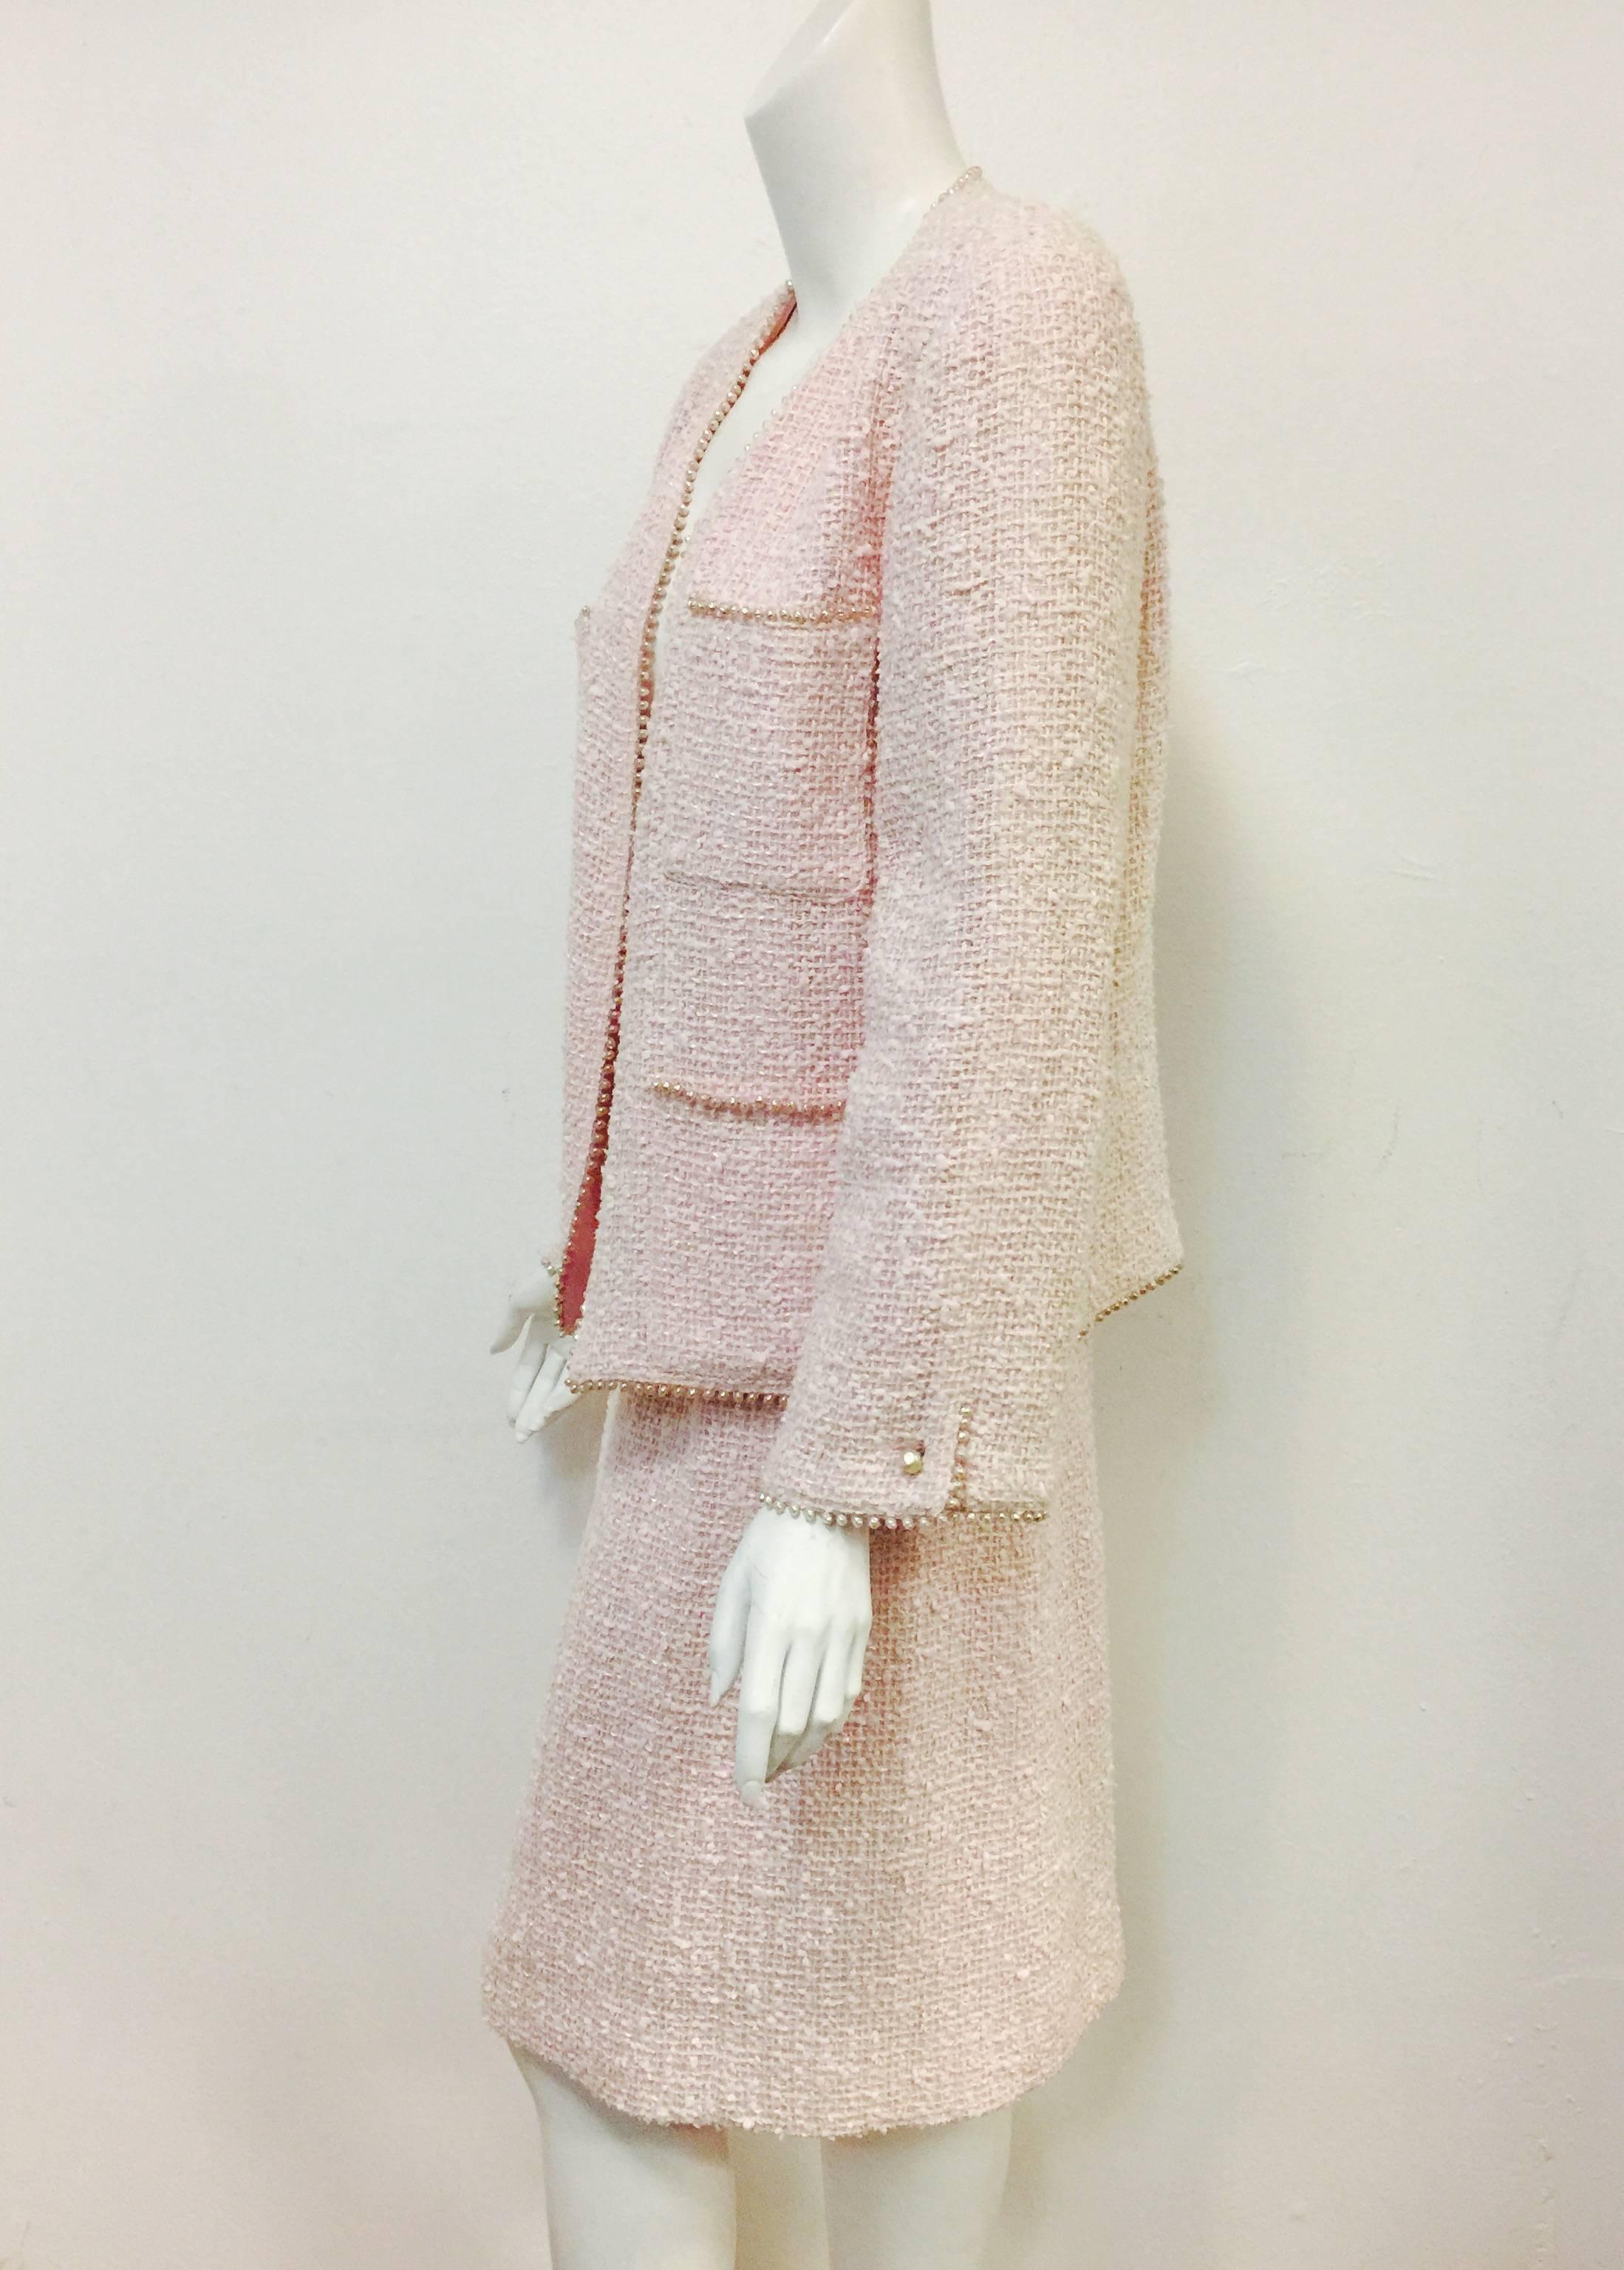 Spring 1999 Chanel Blush Pink Skirt Suit is fit for 